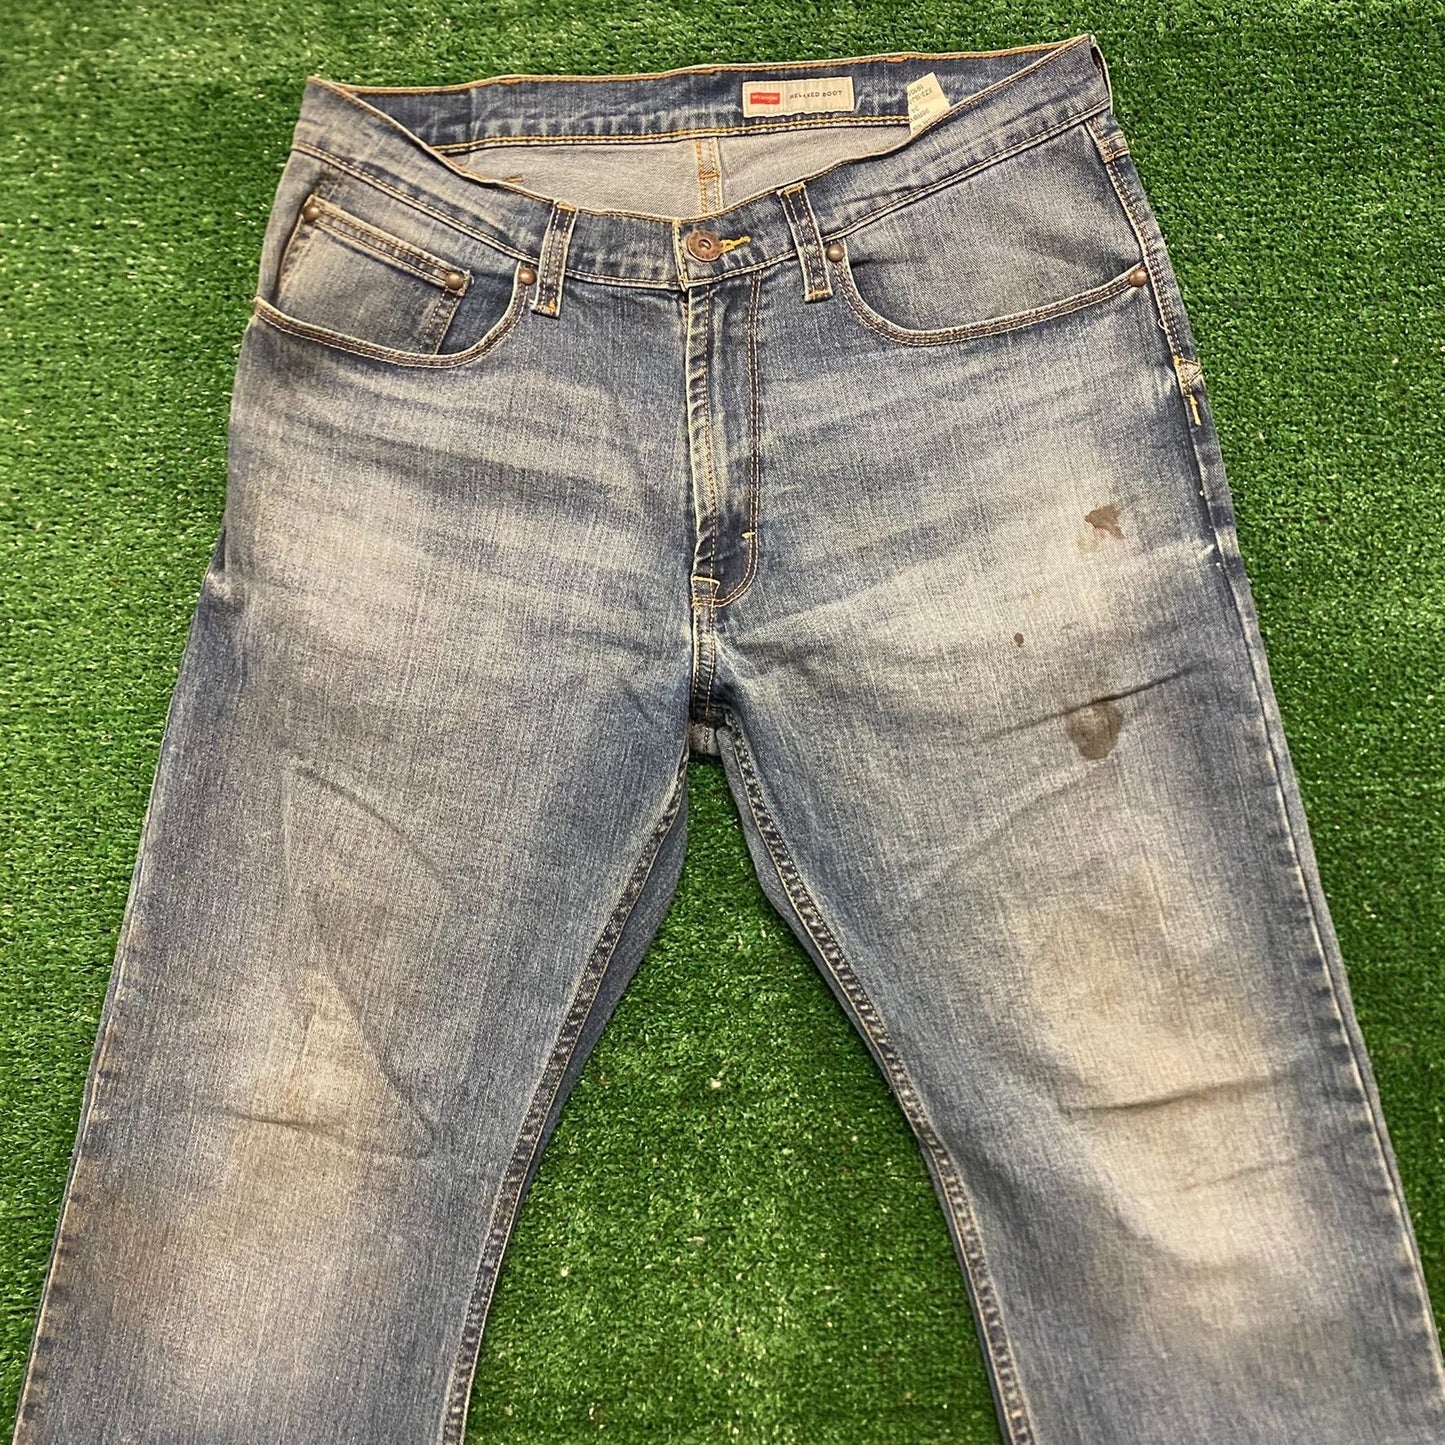 Wrangler Distressed Relaxed Boot Cut Denim Jeans Pants